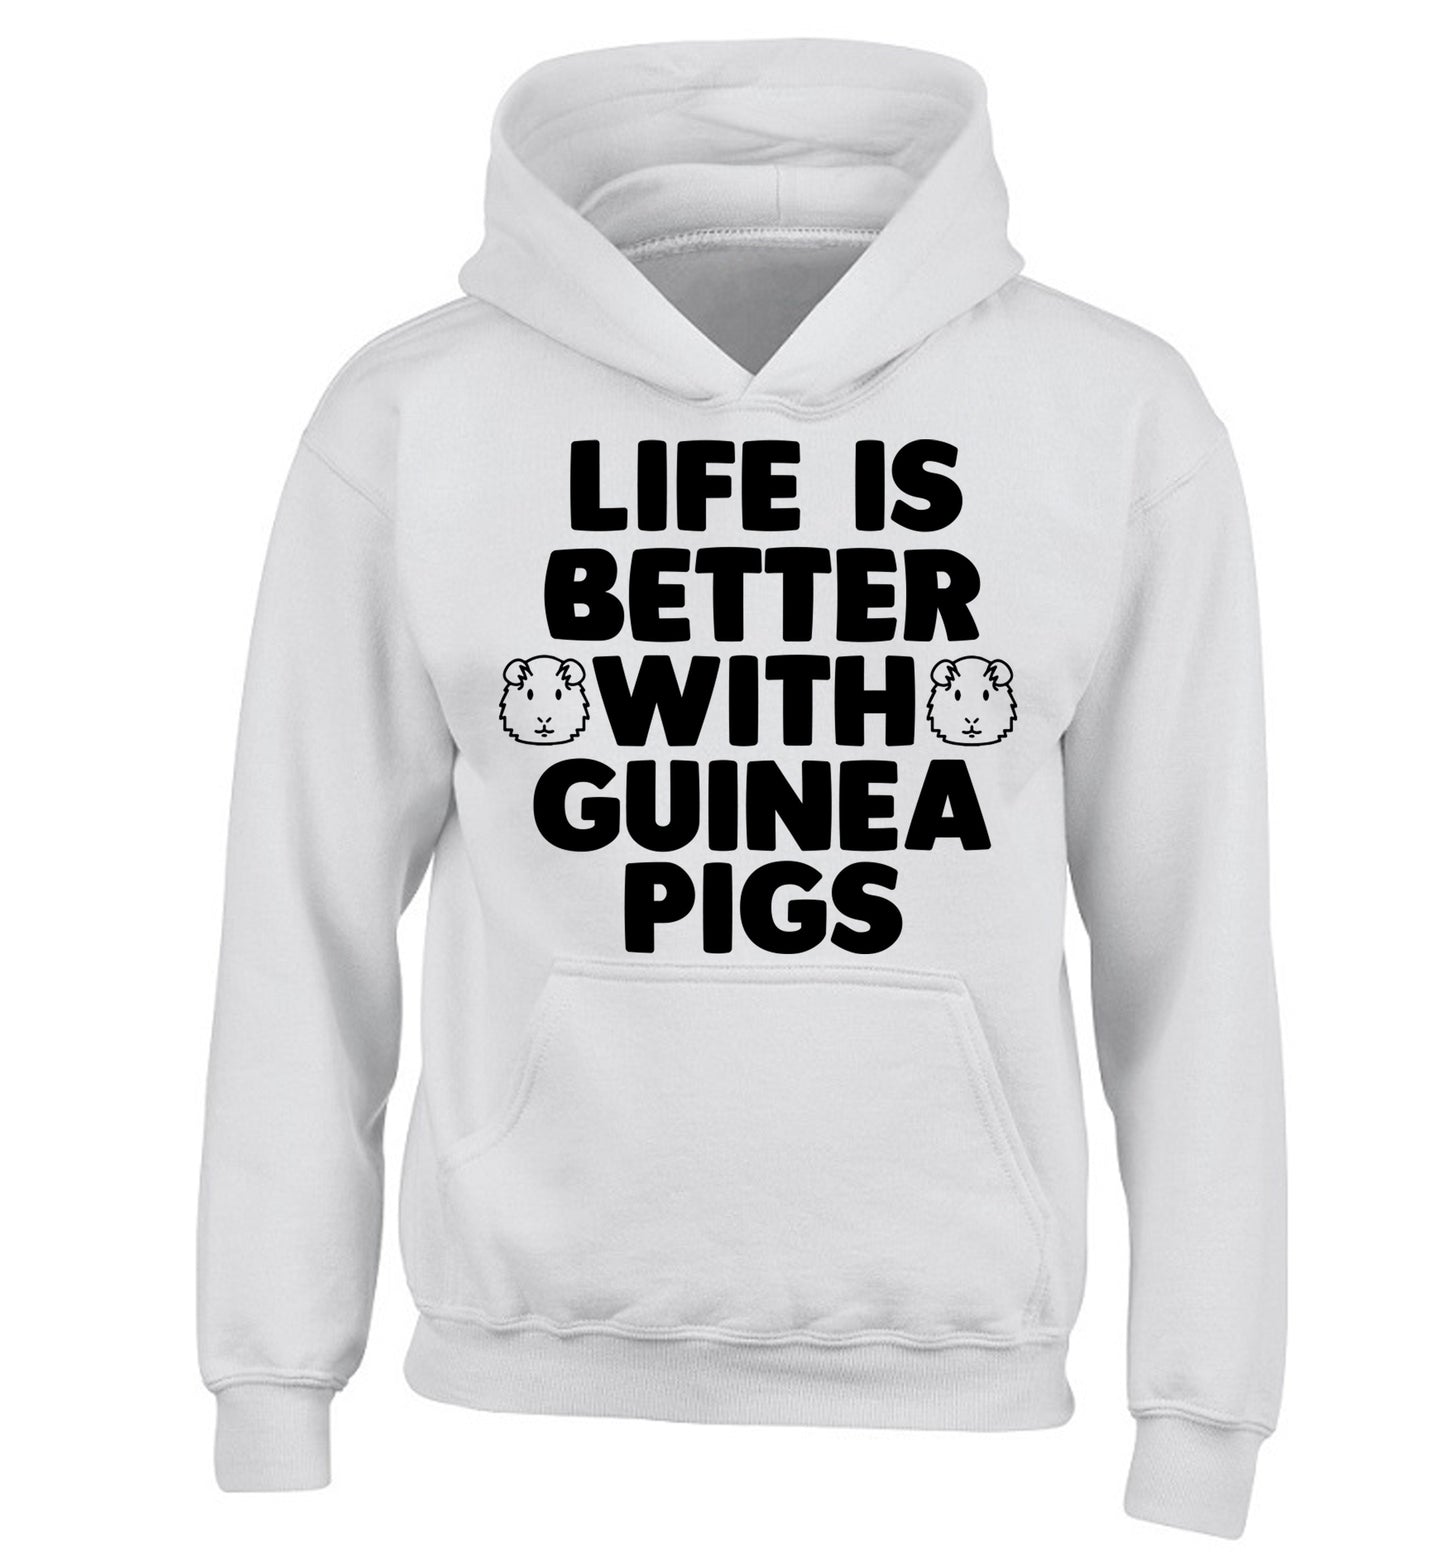 Life is better with guinea pigs children's white hoodie 12-14 Years